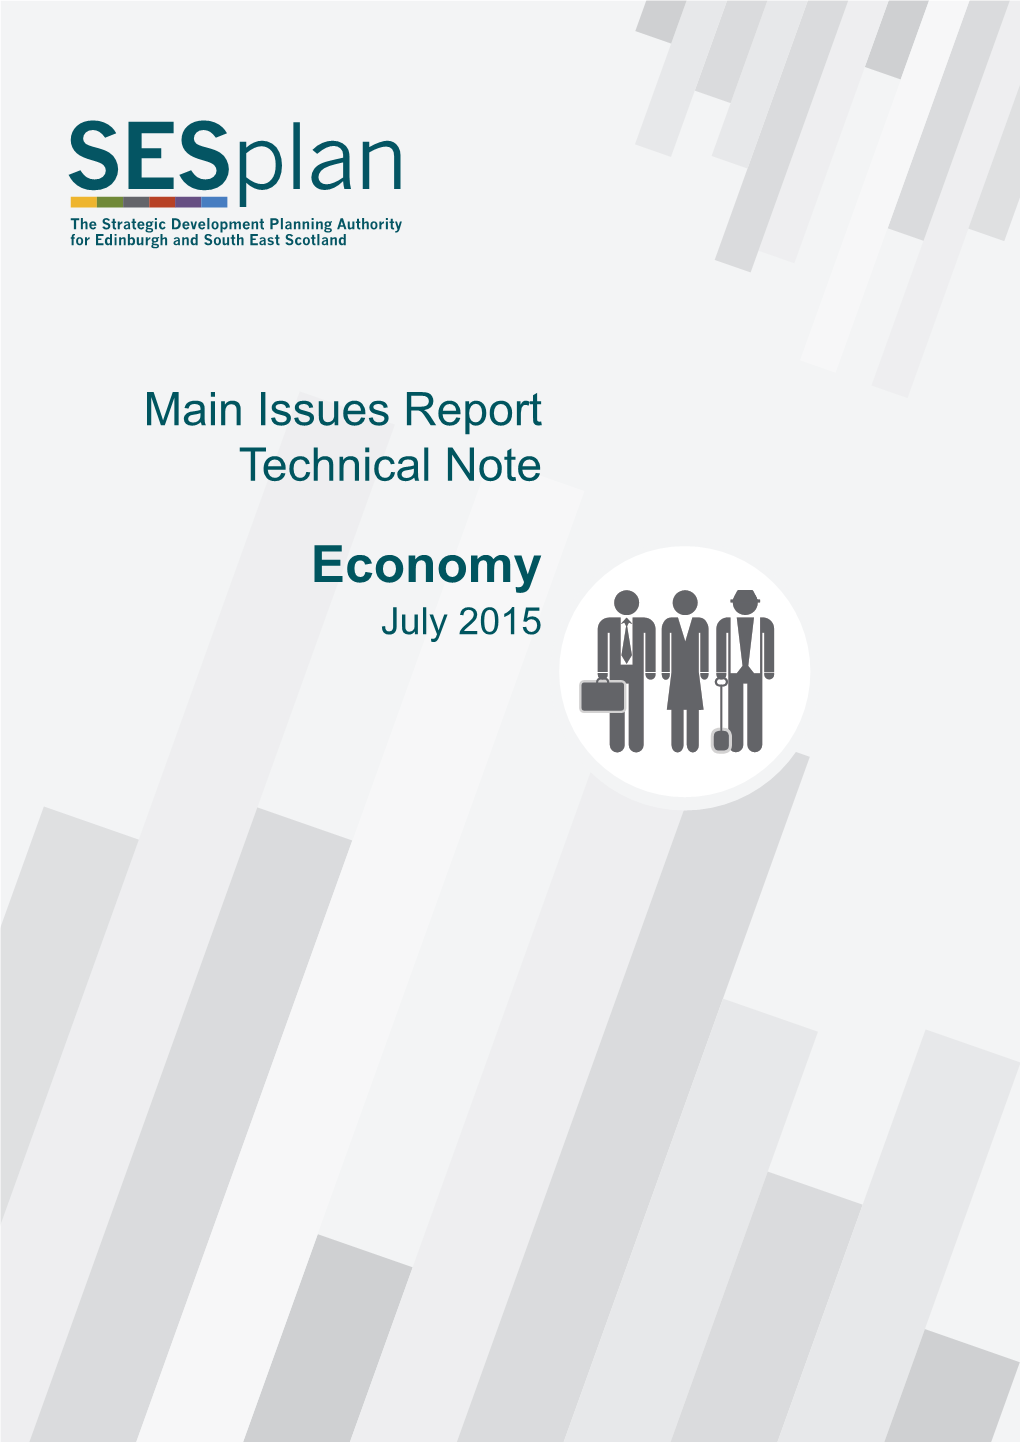 Economy Technical Note Provides the Background Supporting Information to the Main Issues Report (MIR) and Will Inform the Proposed Plan